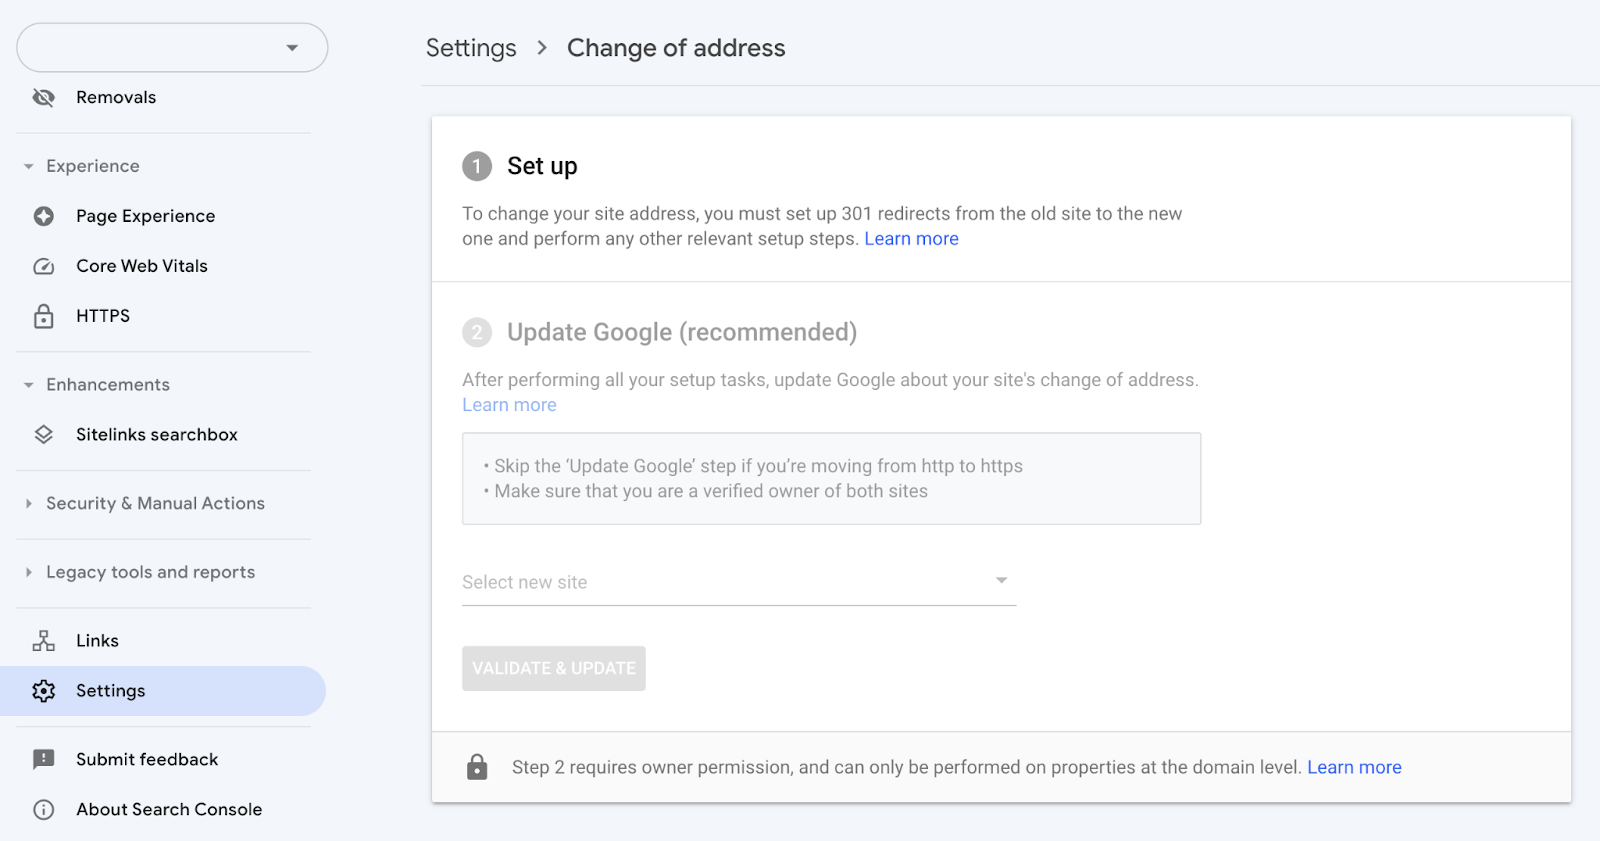 Change of address page in Google Search Console